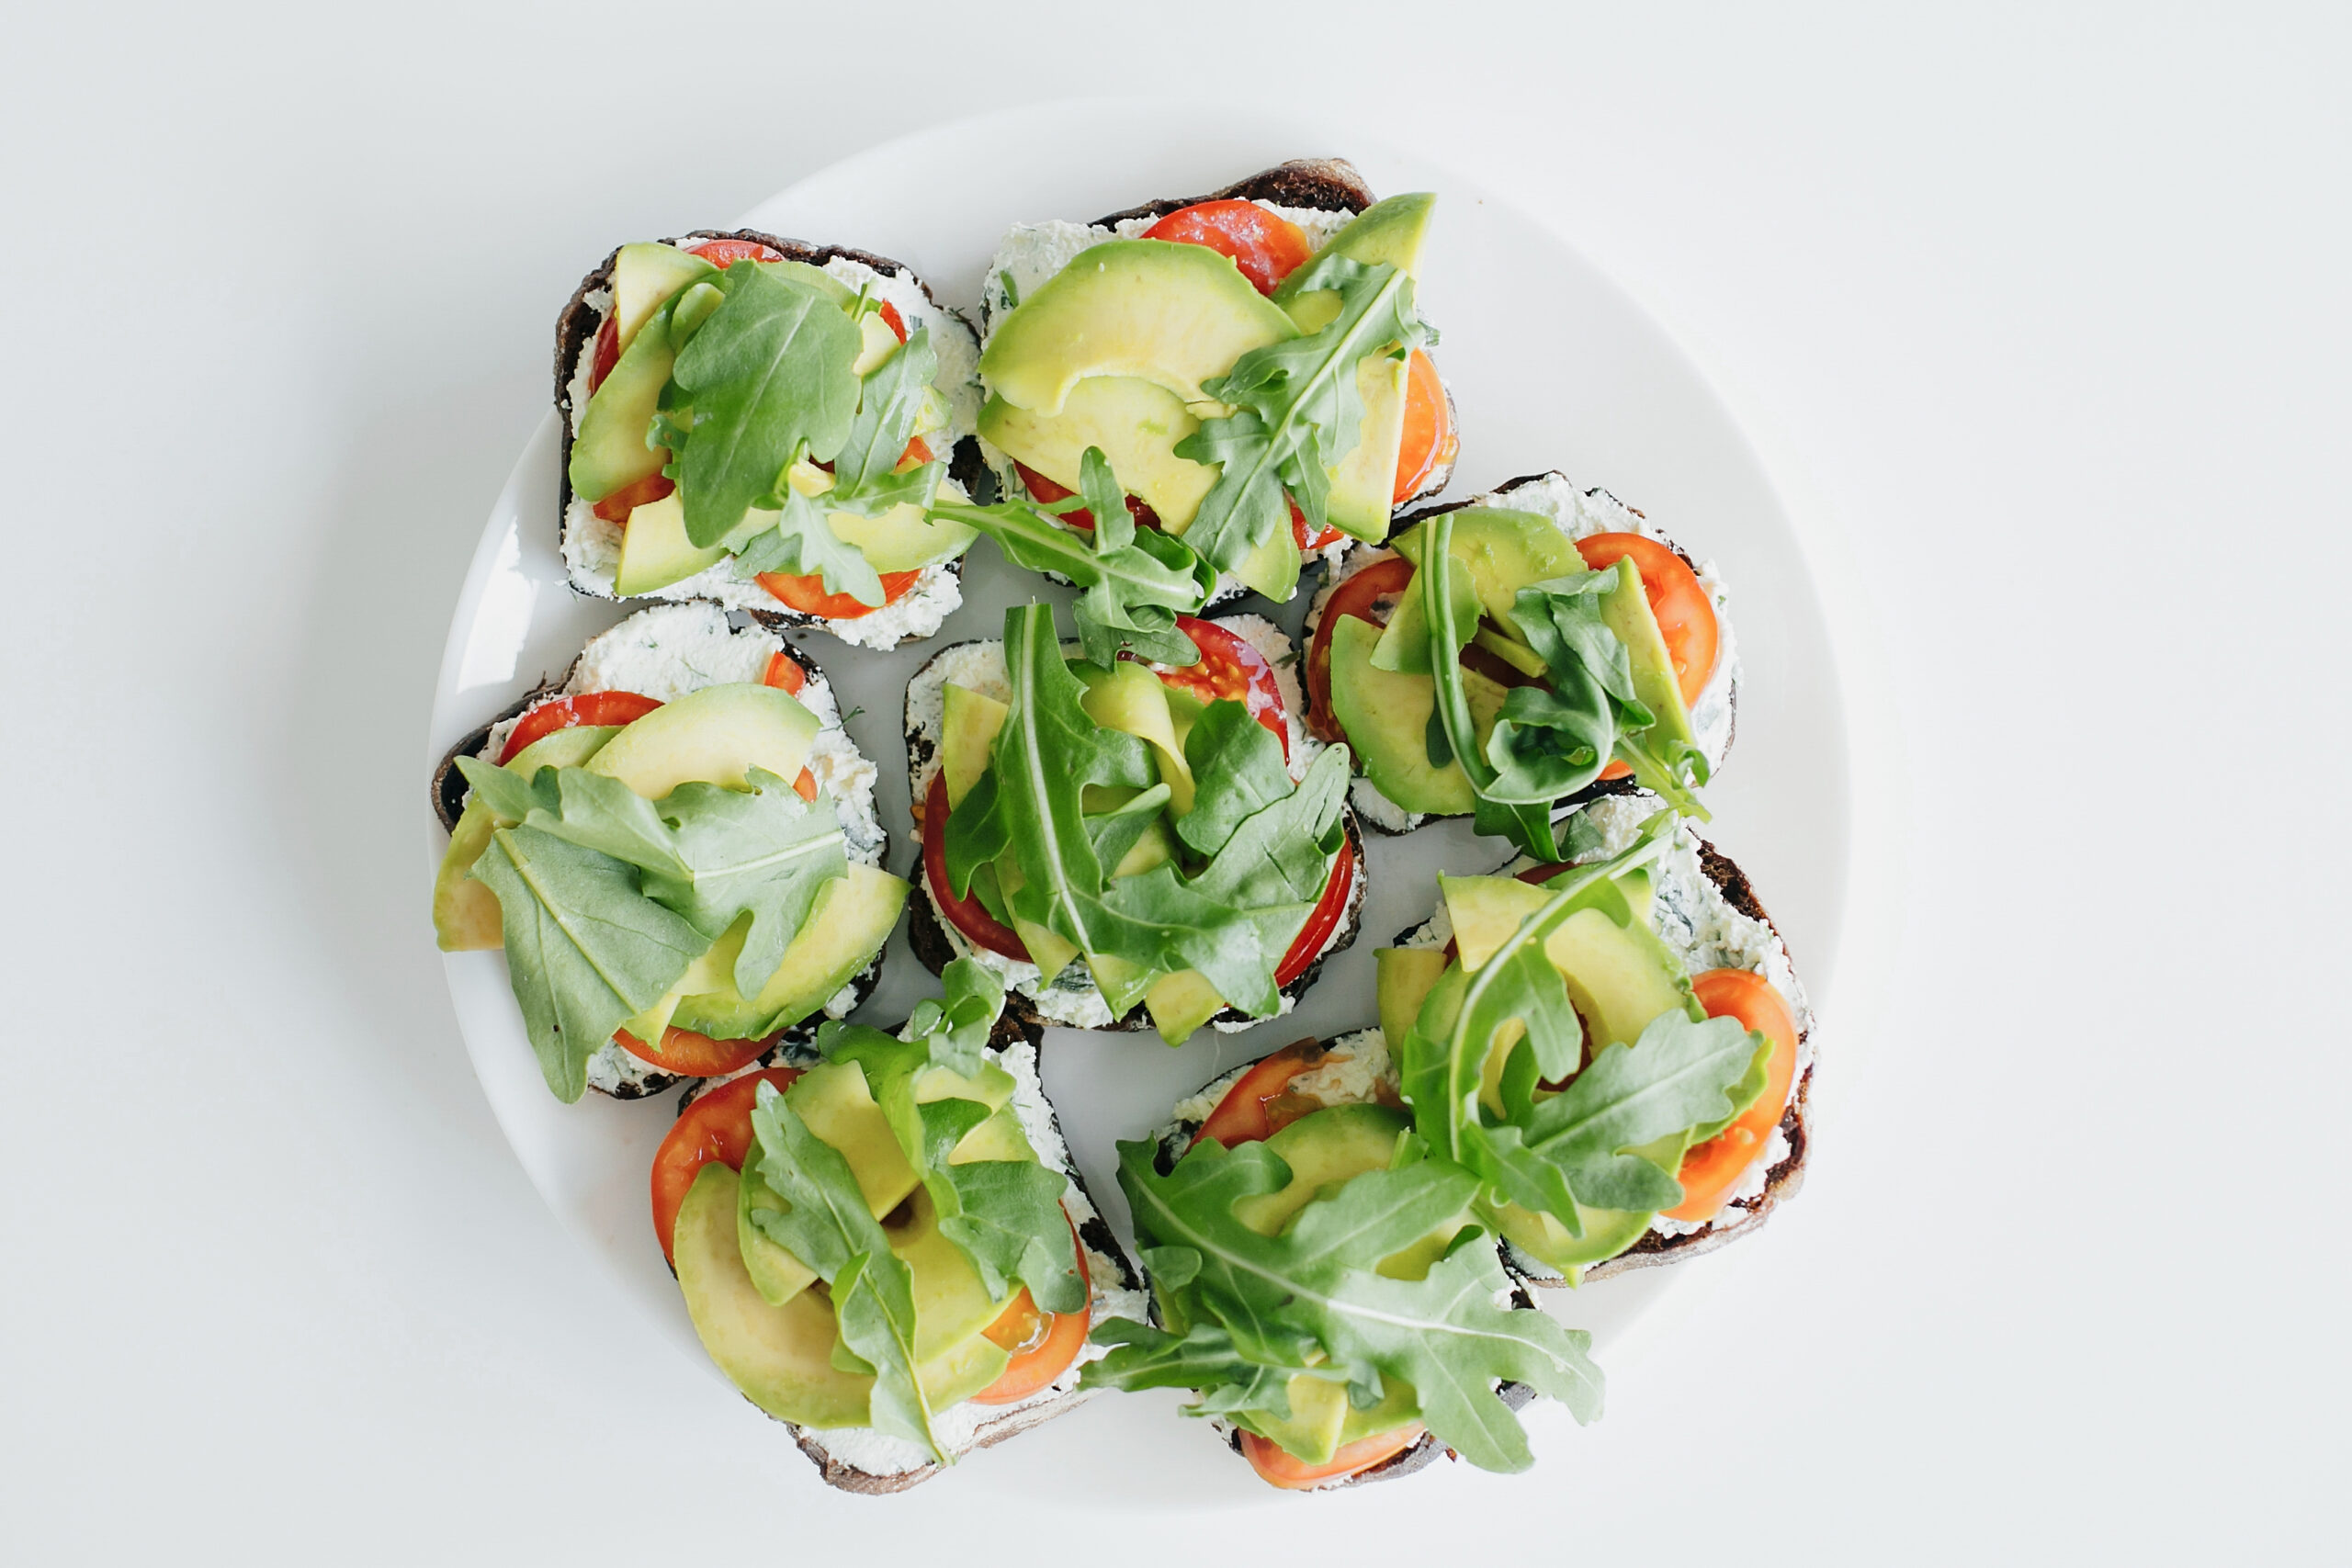 Rules of a Healthy Lifestyle: 7 Healthy Recipes for Toasts with Avocado